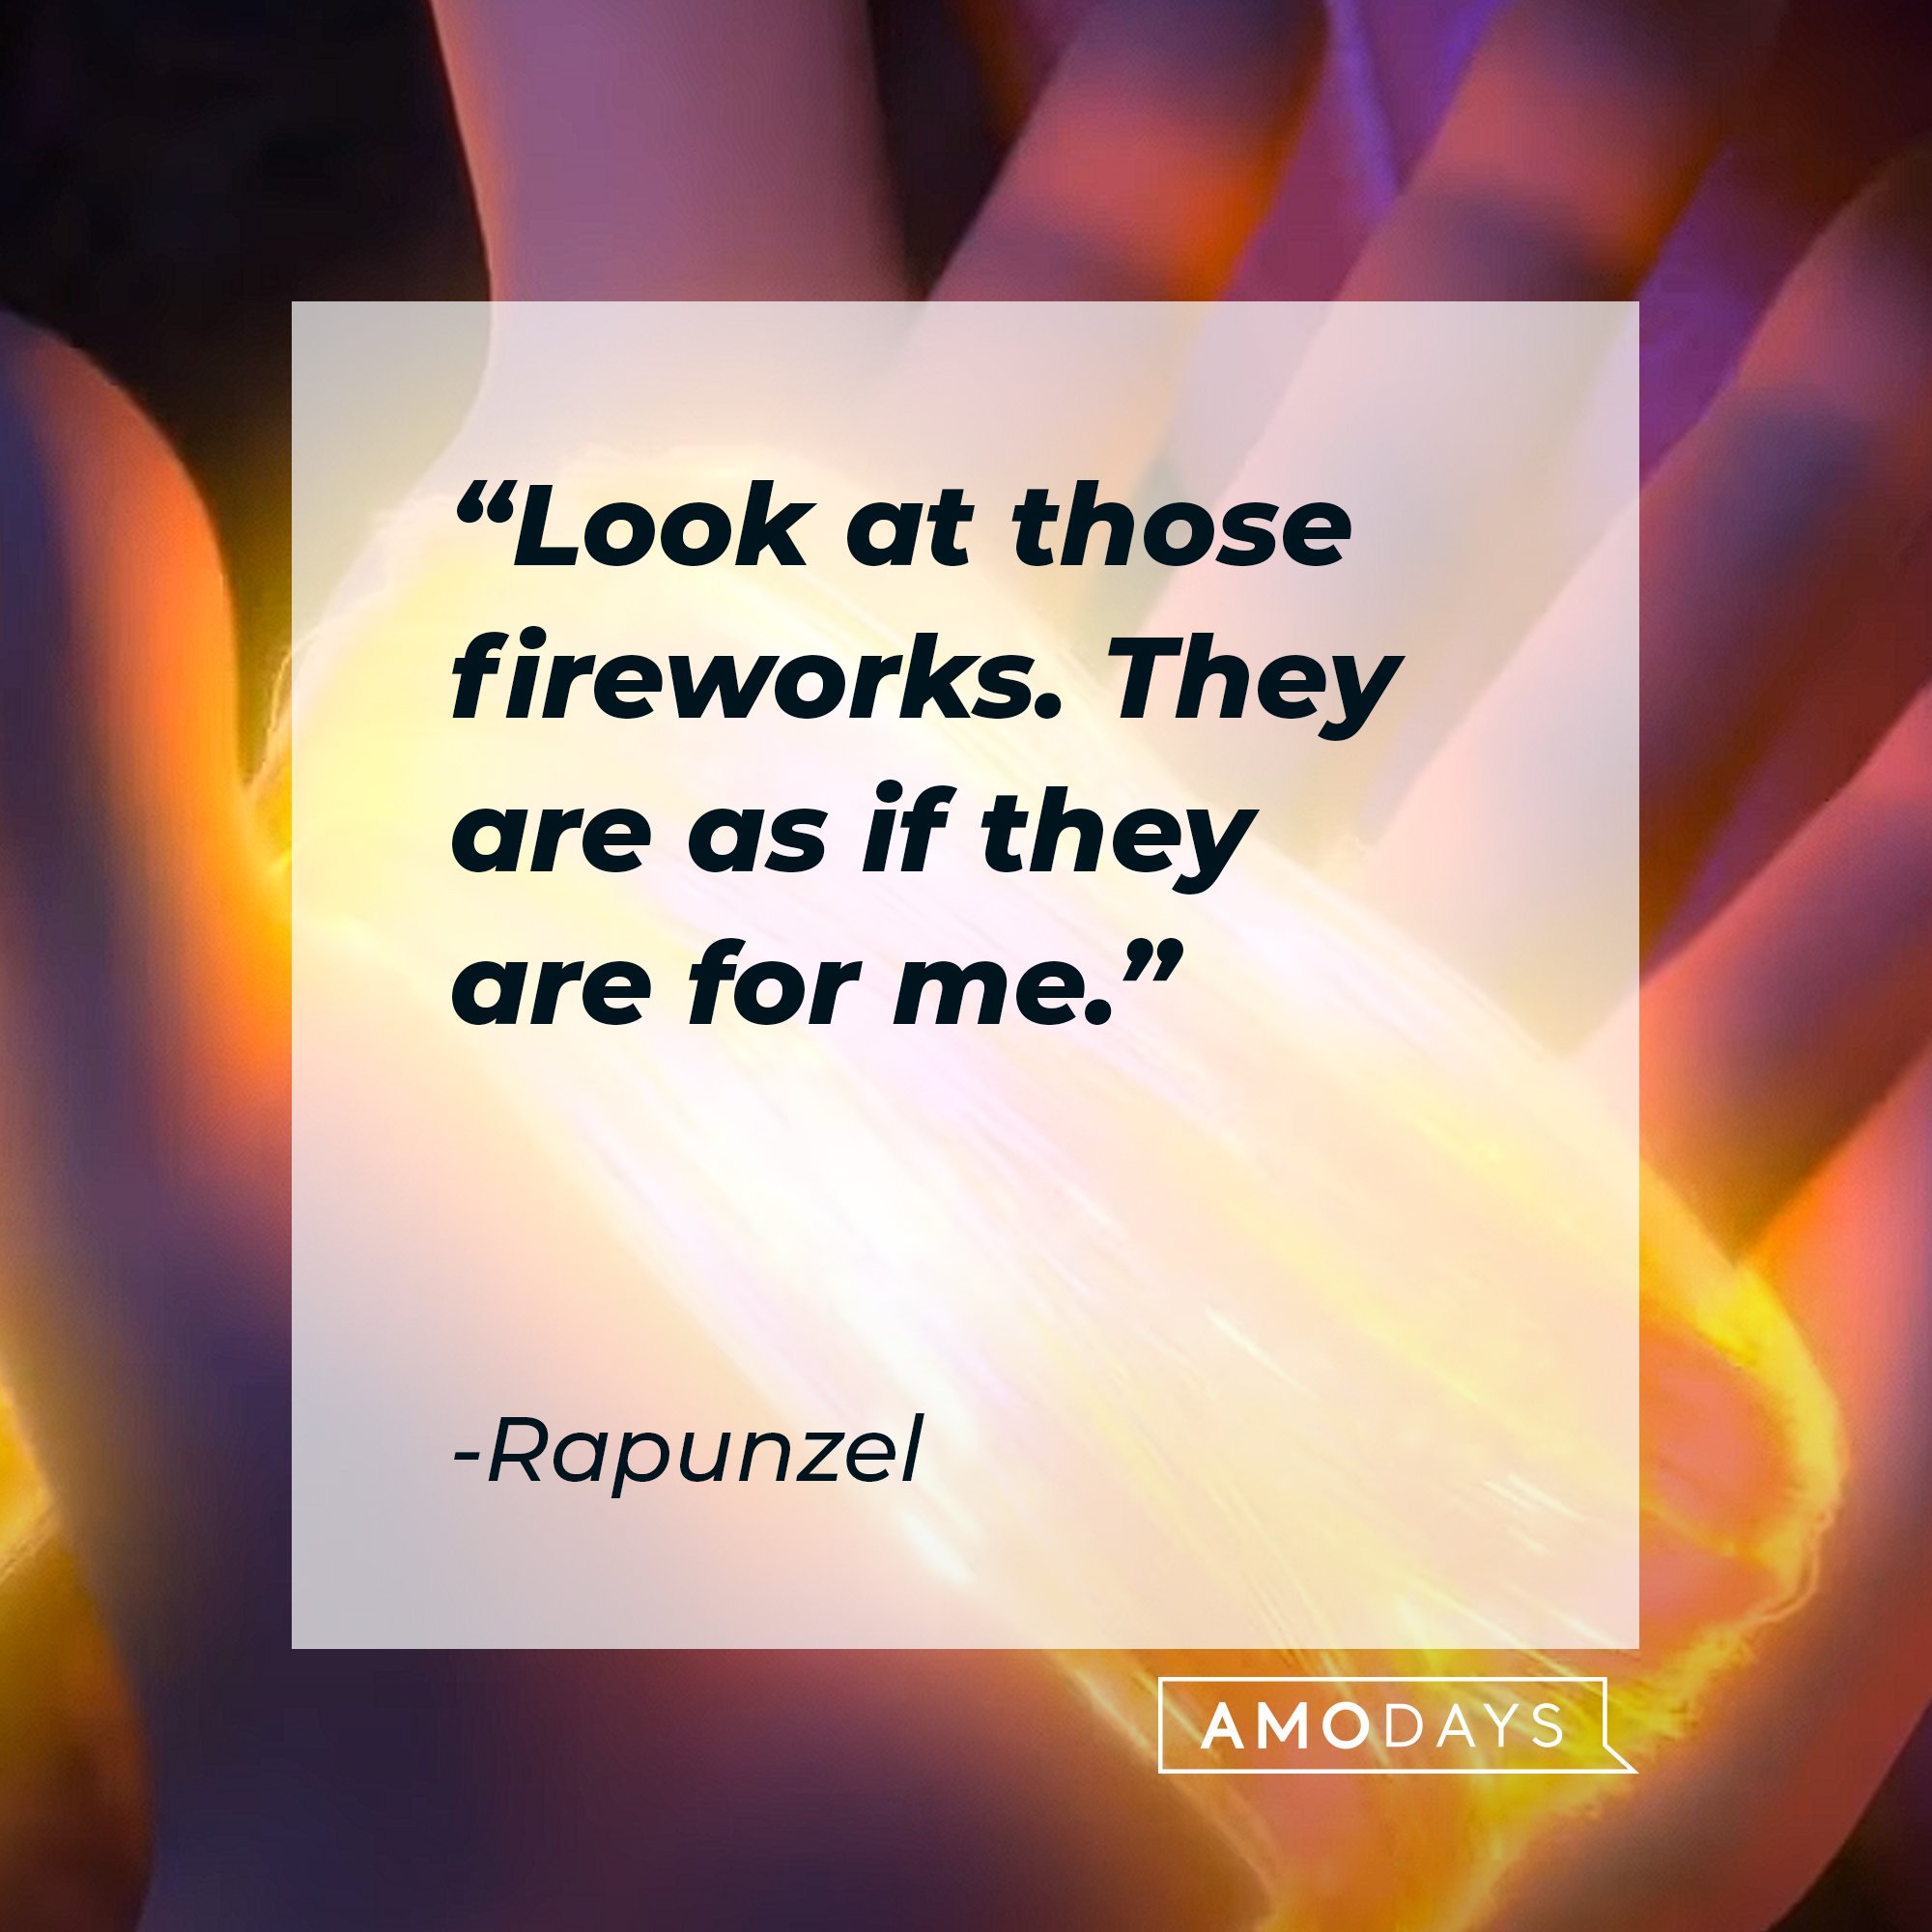 Rapunzel's quote: "Look at those fireworks. They are as if they are for me." | Image: AmoDays